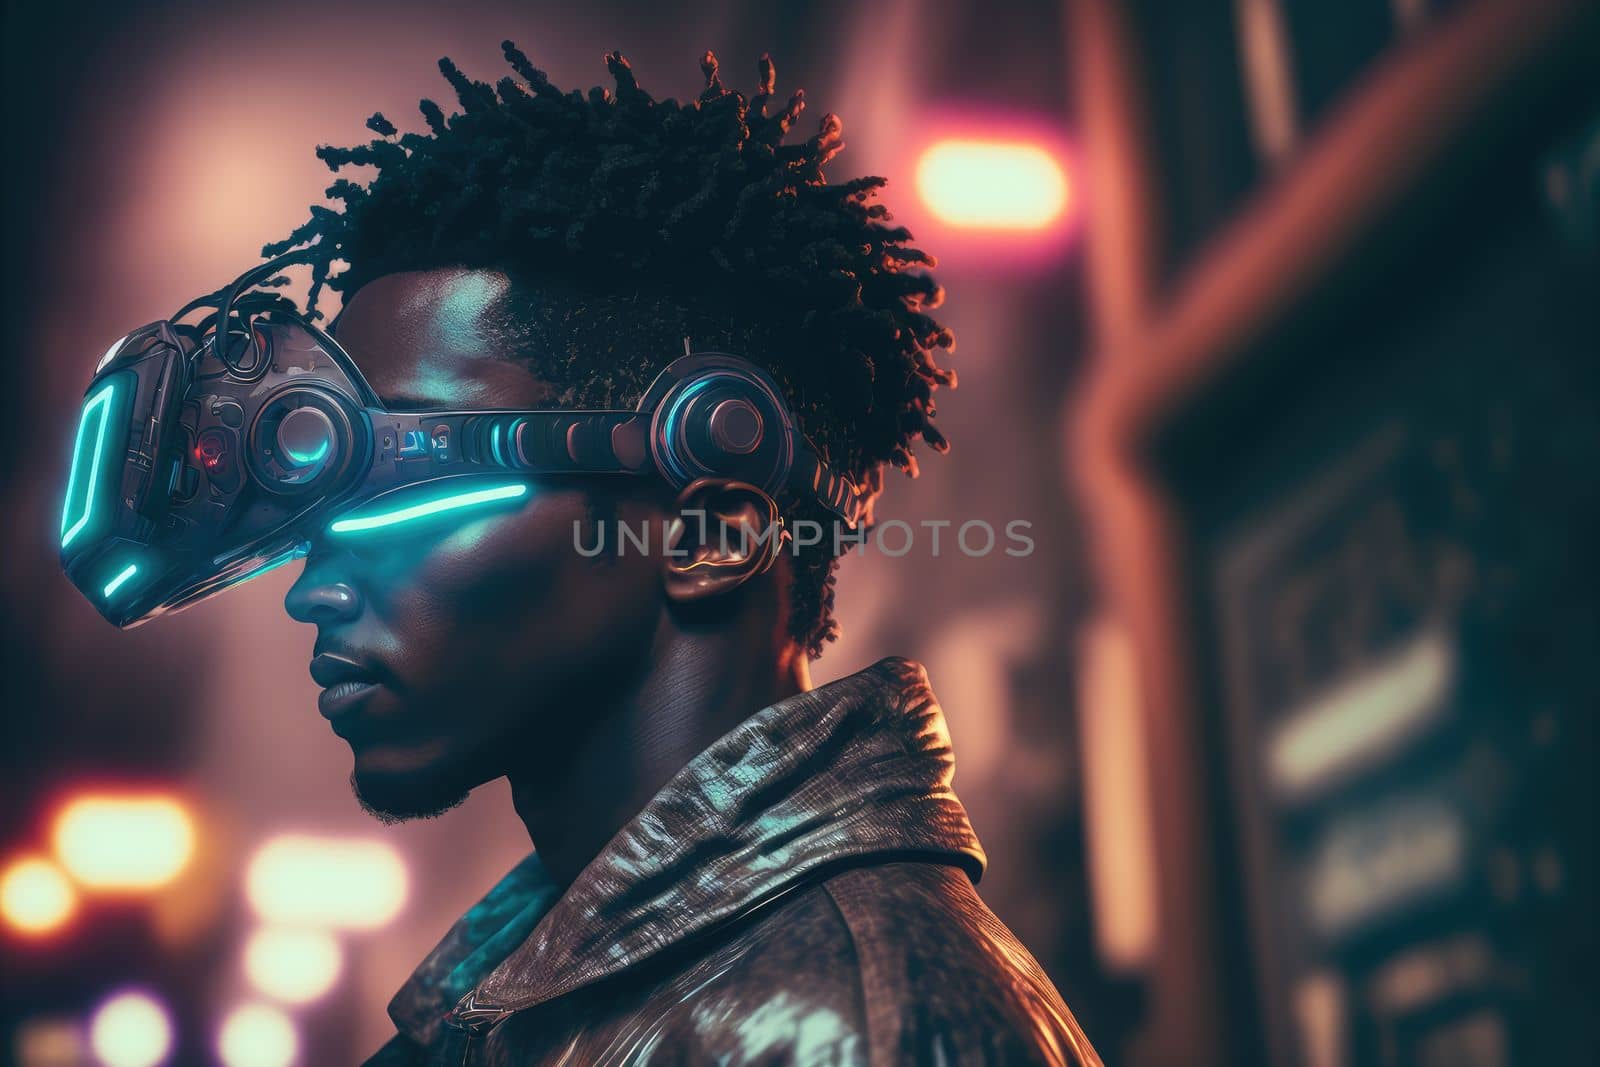 African man wearing virtual reality goggles standing in virtual world background . Concept of virtual reality technology , gaming simulation and metaverse. Peculiar AI generative image.